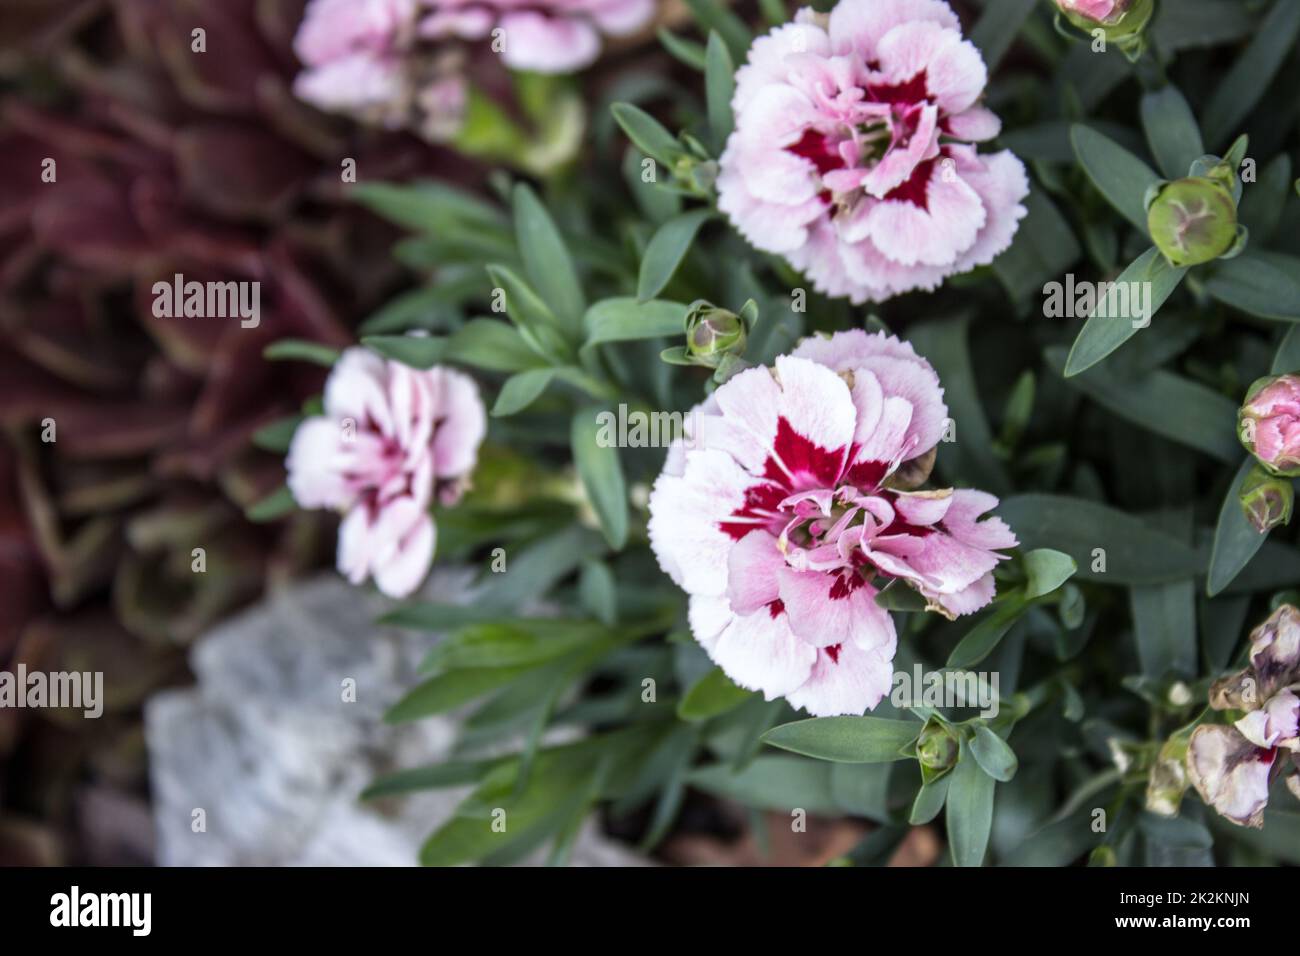 White dianthus caryophillus with red center Stock Photo